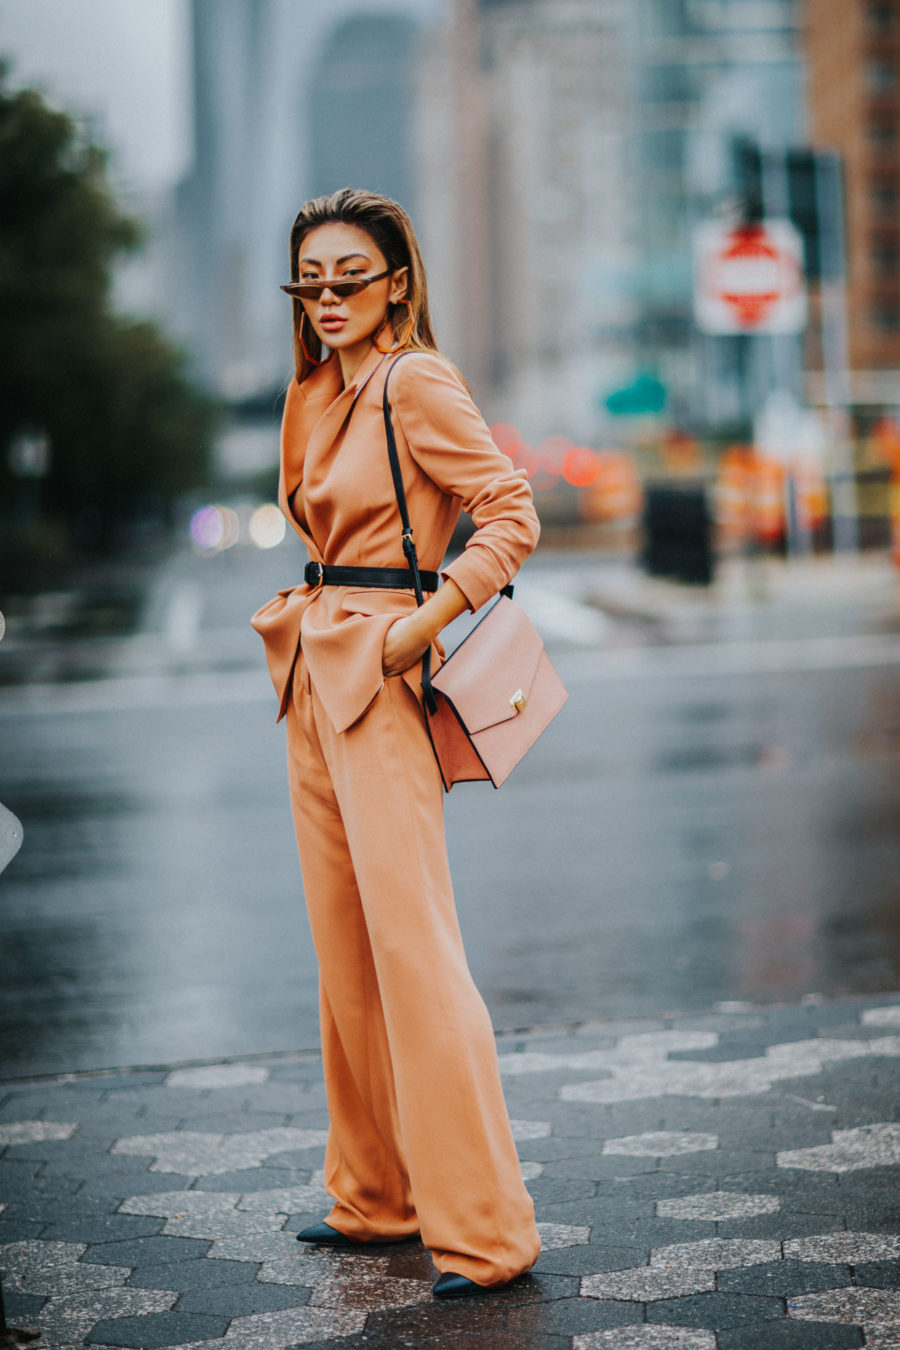 biggest street style trends of spring 2019, beige fashion trend, nude trend // Notjessfashion.com